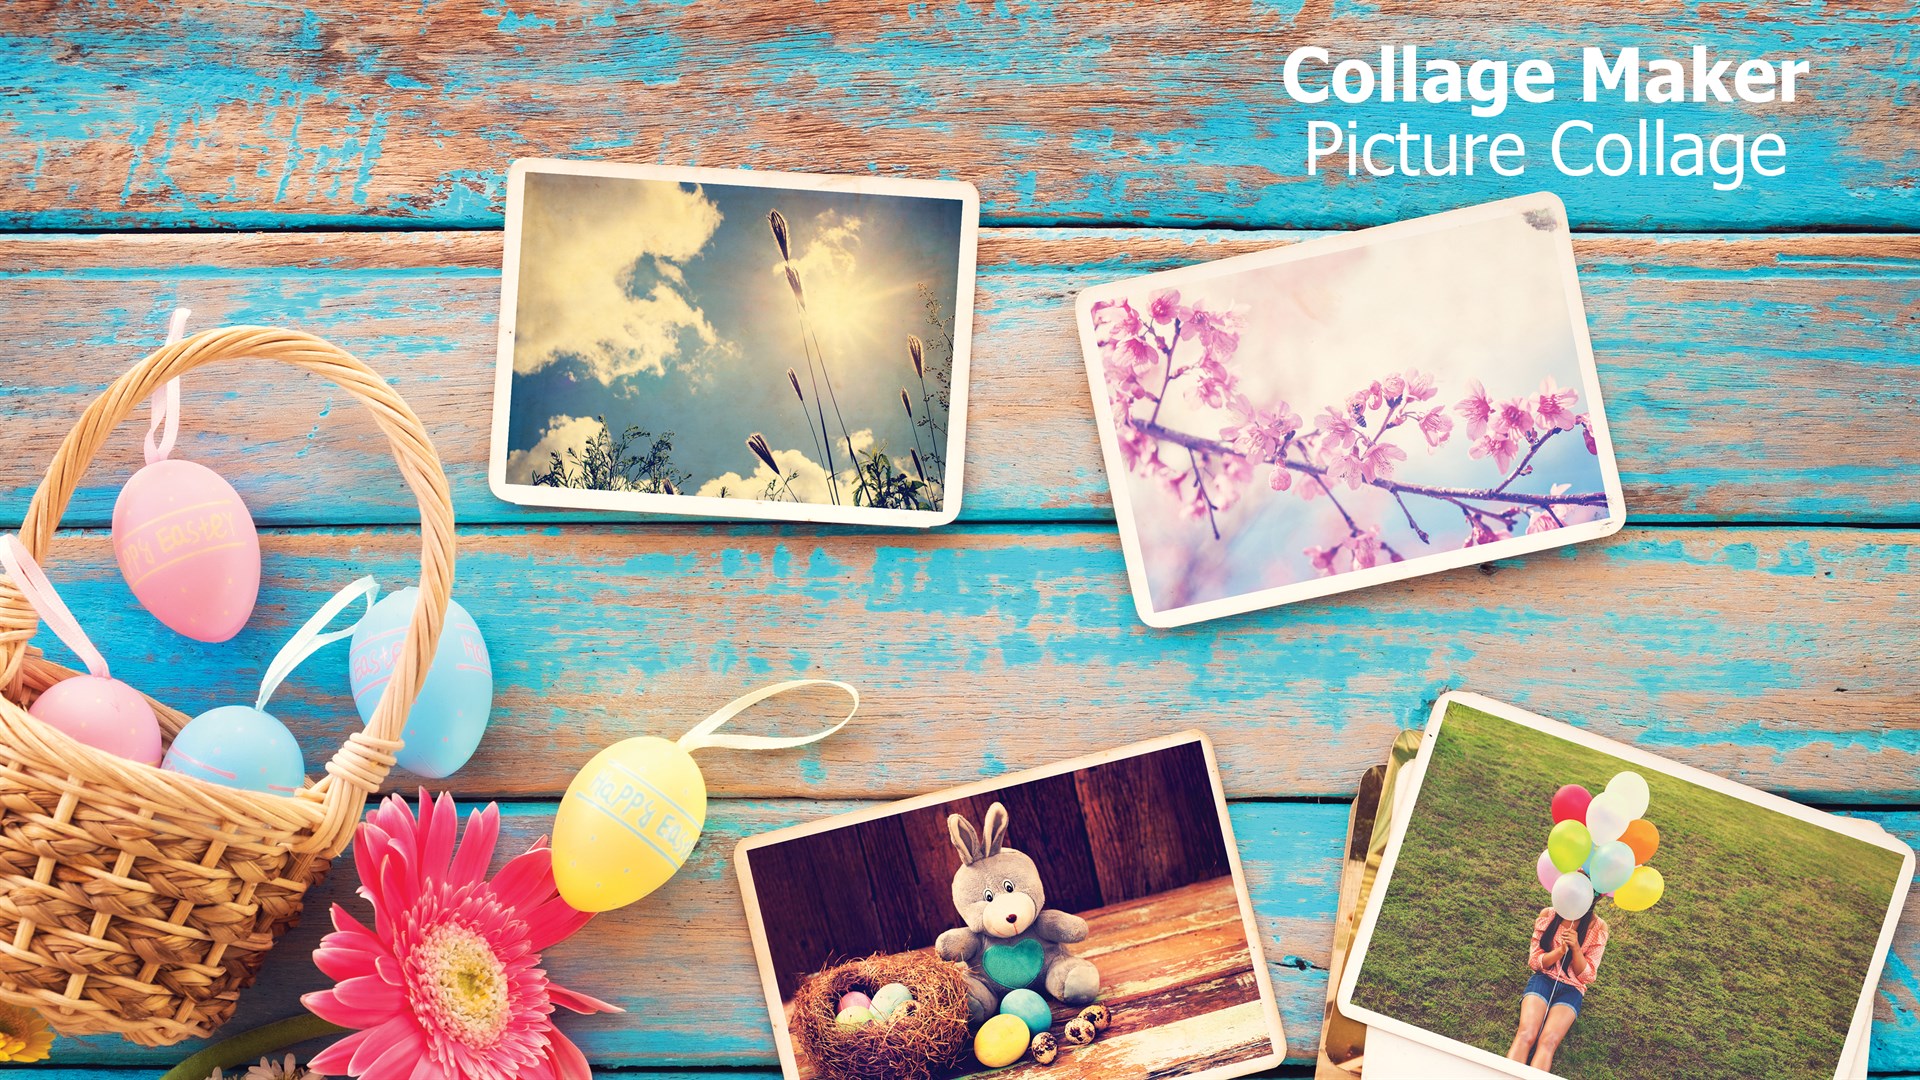 free online photo collage maker 7imegs